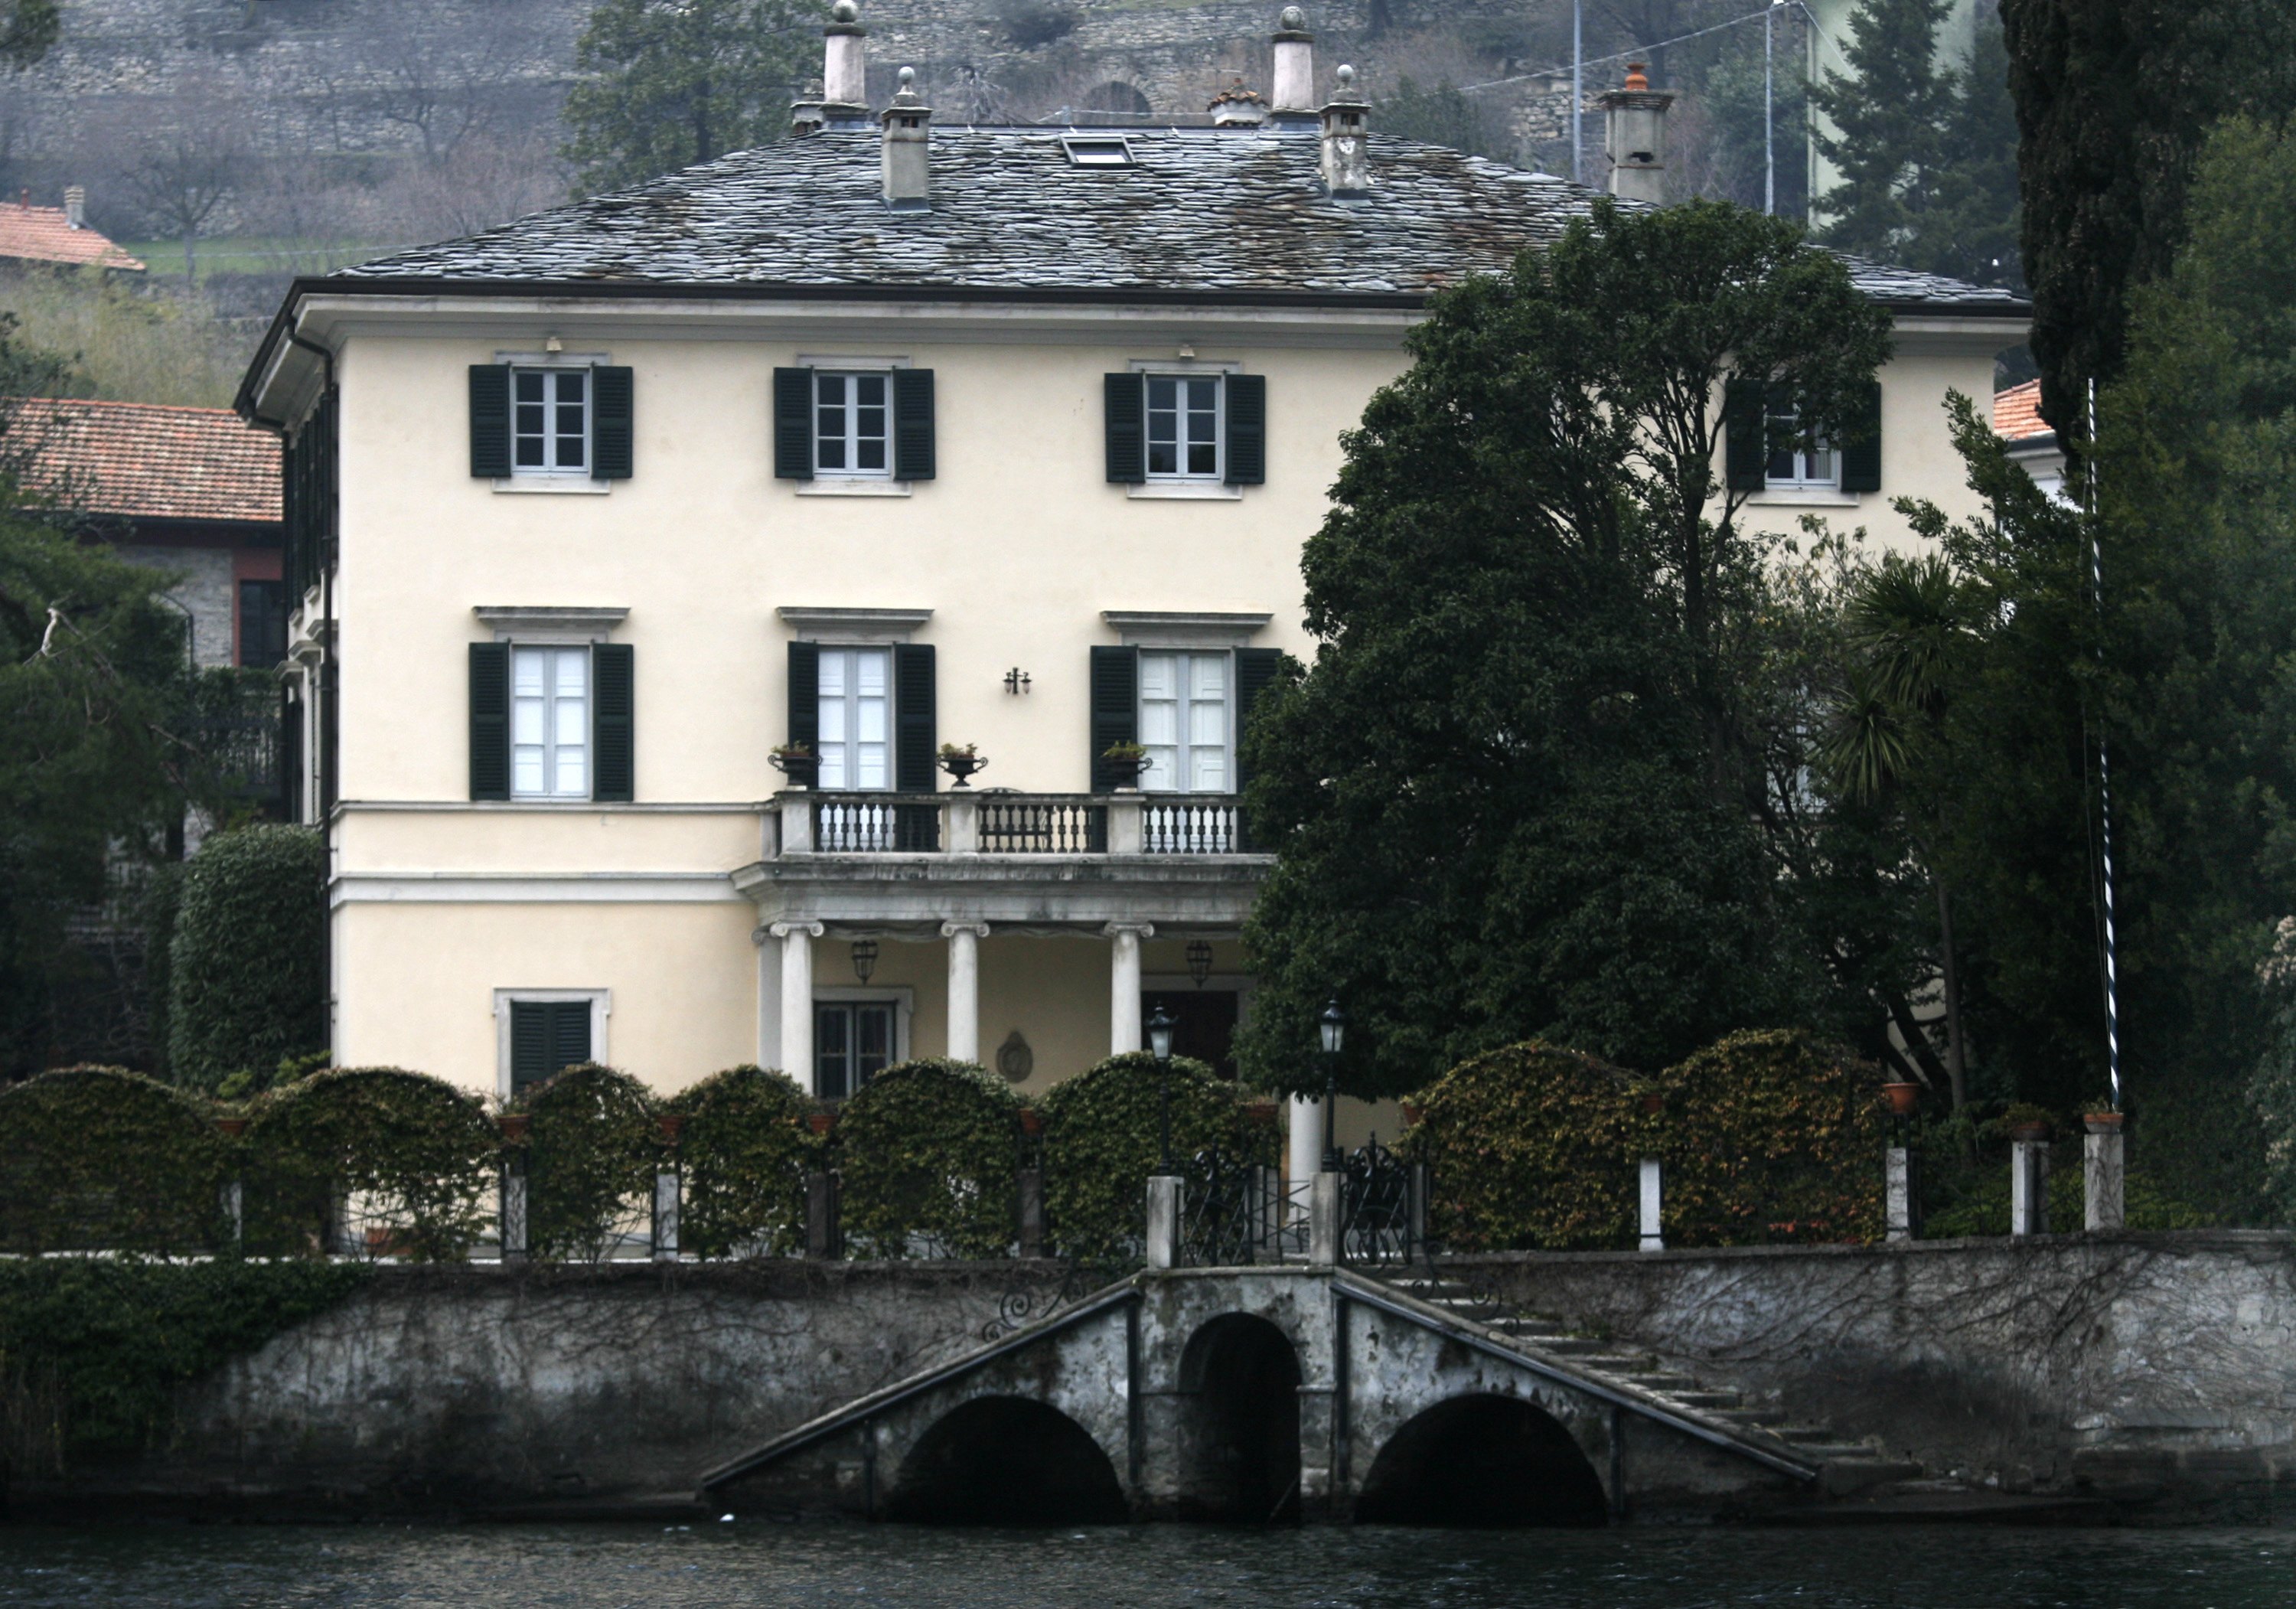 Villa Oleandra, owned by George Clooney on March 18, 2006 in Como, Italy. | Source: Getty Images